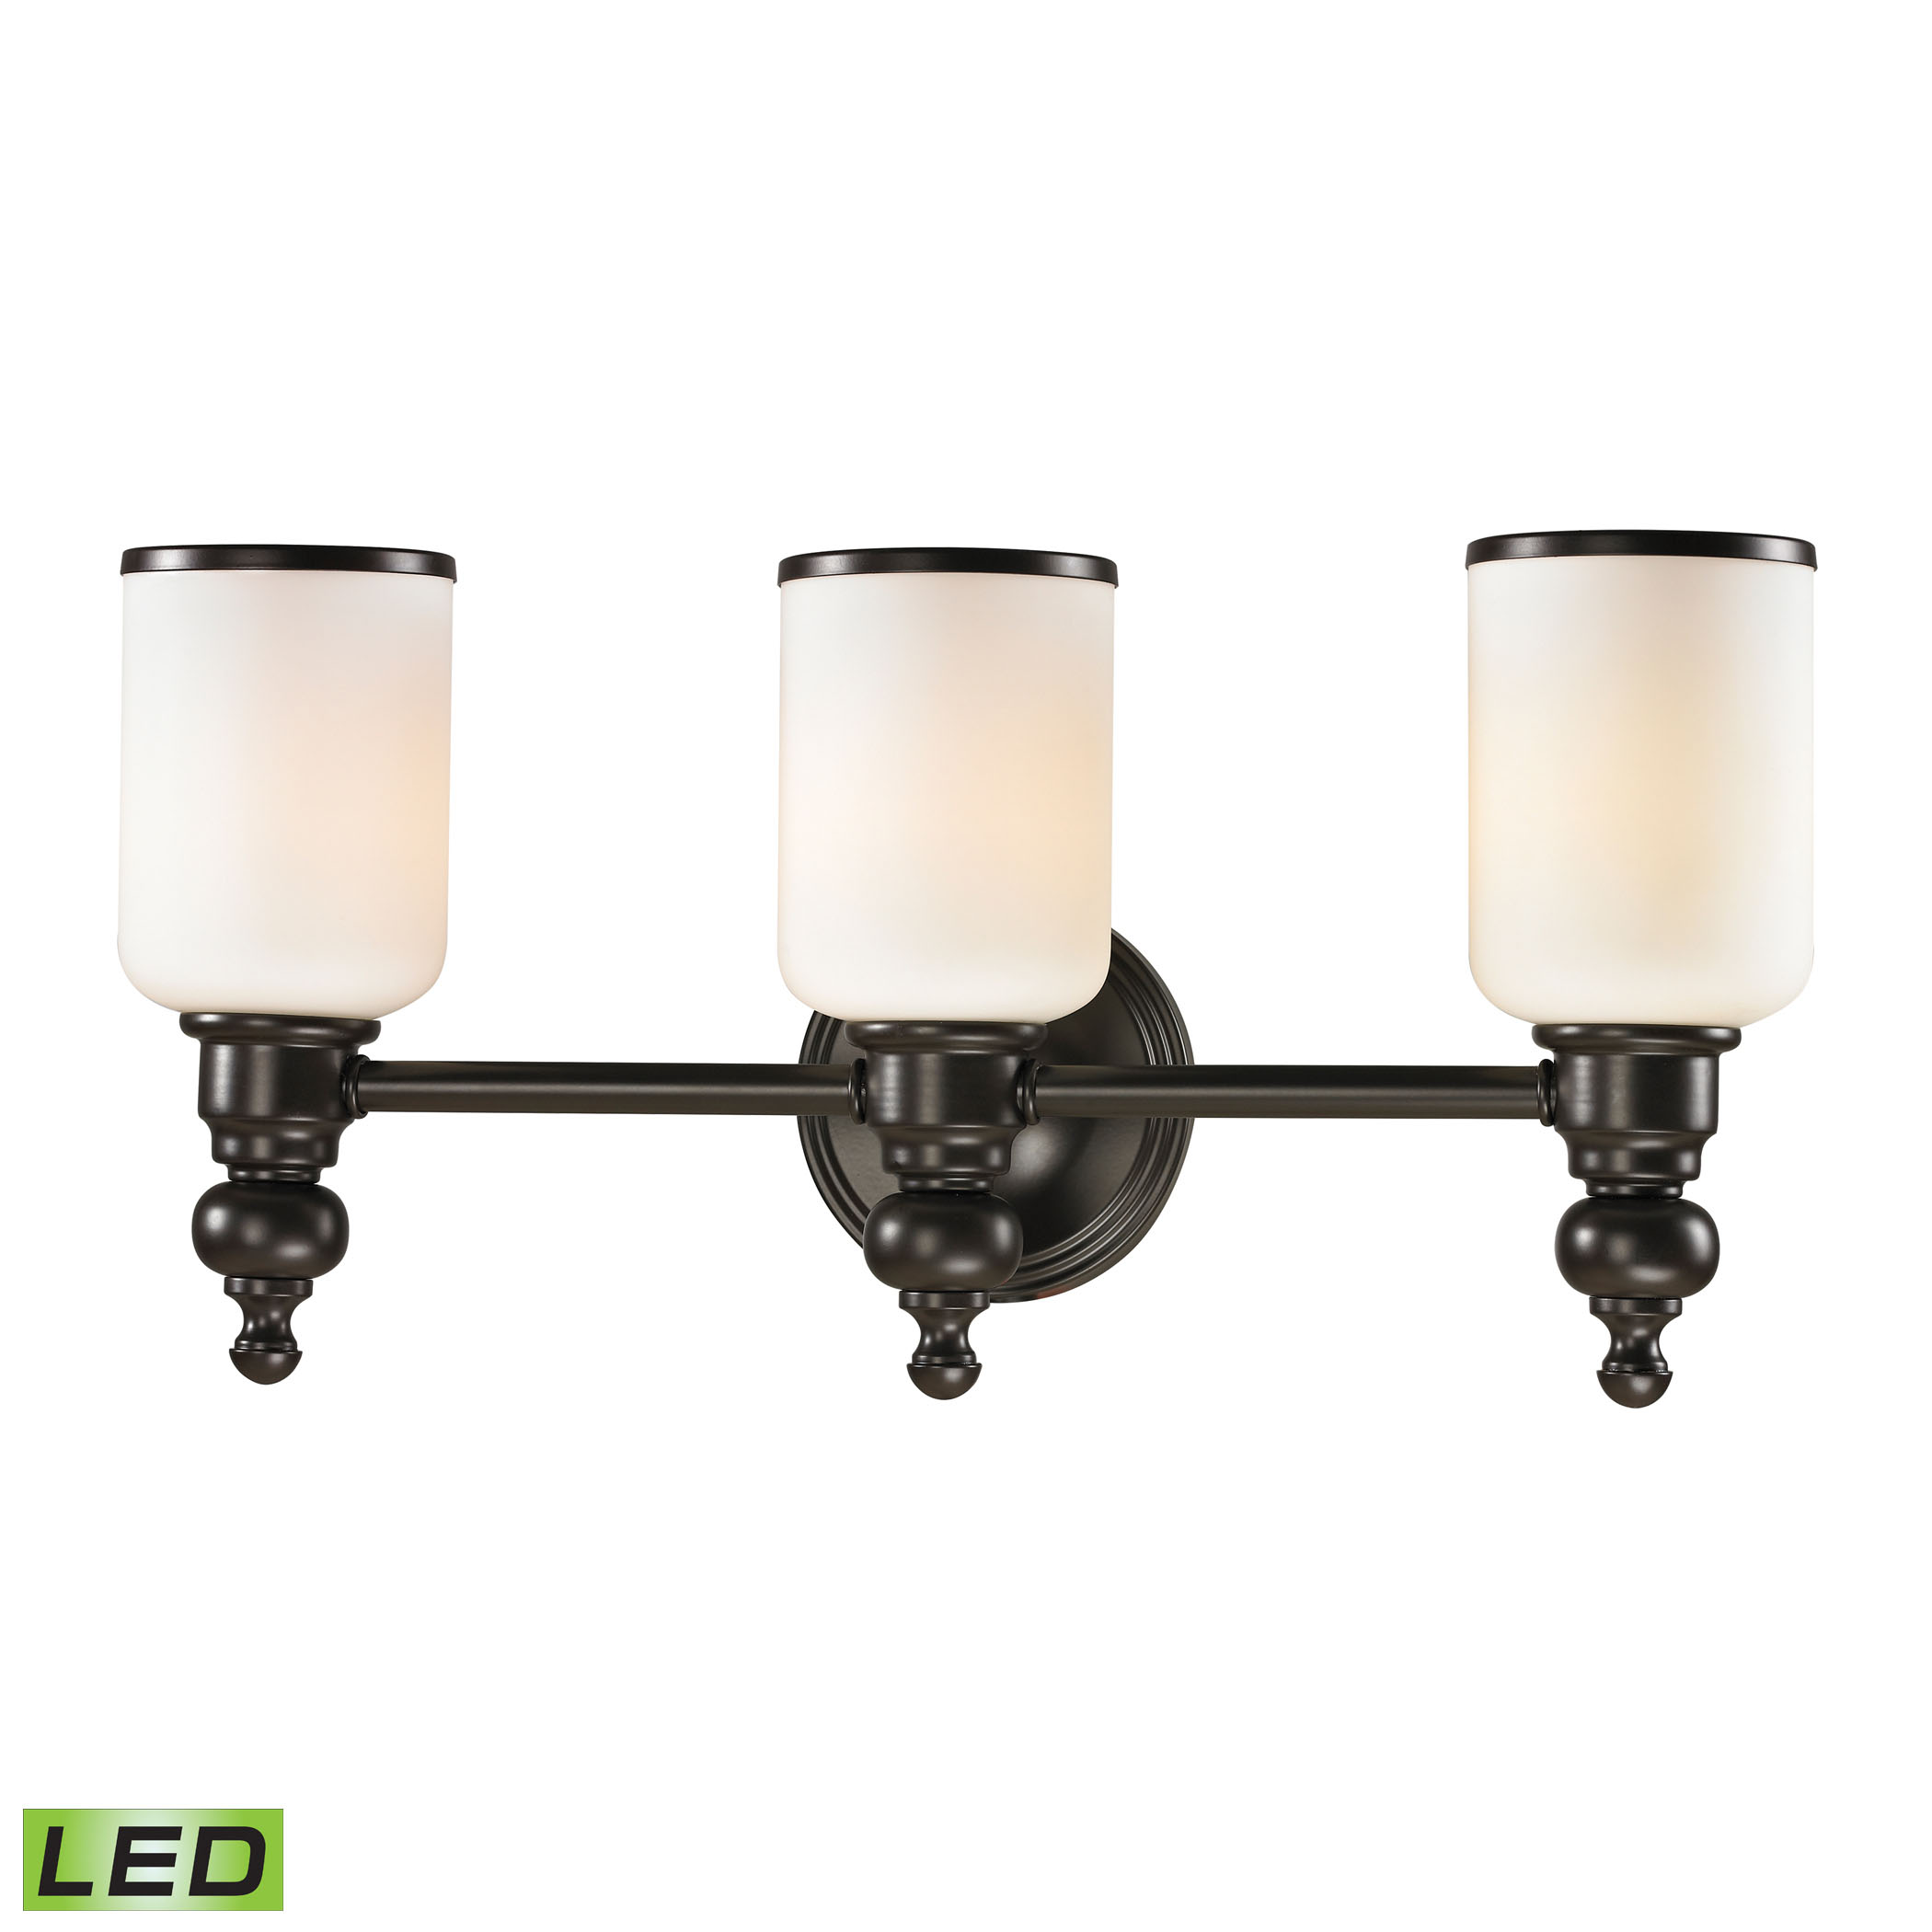 Bristol Collection 3 Light Bath in Oil Rubbed Bronze - LED, 800 Lumens (2400 Lumens Total) with Full